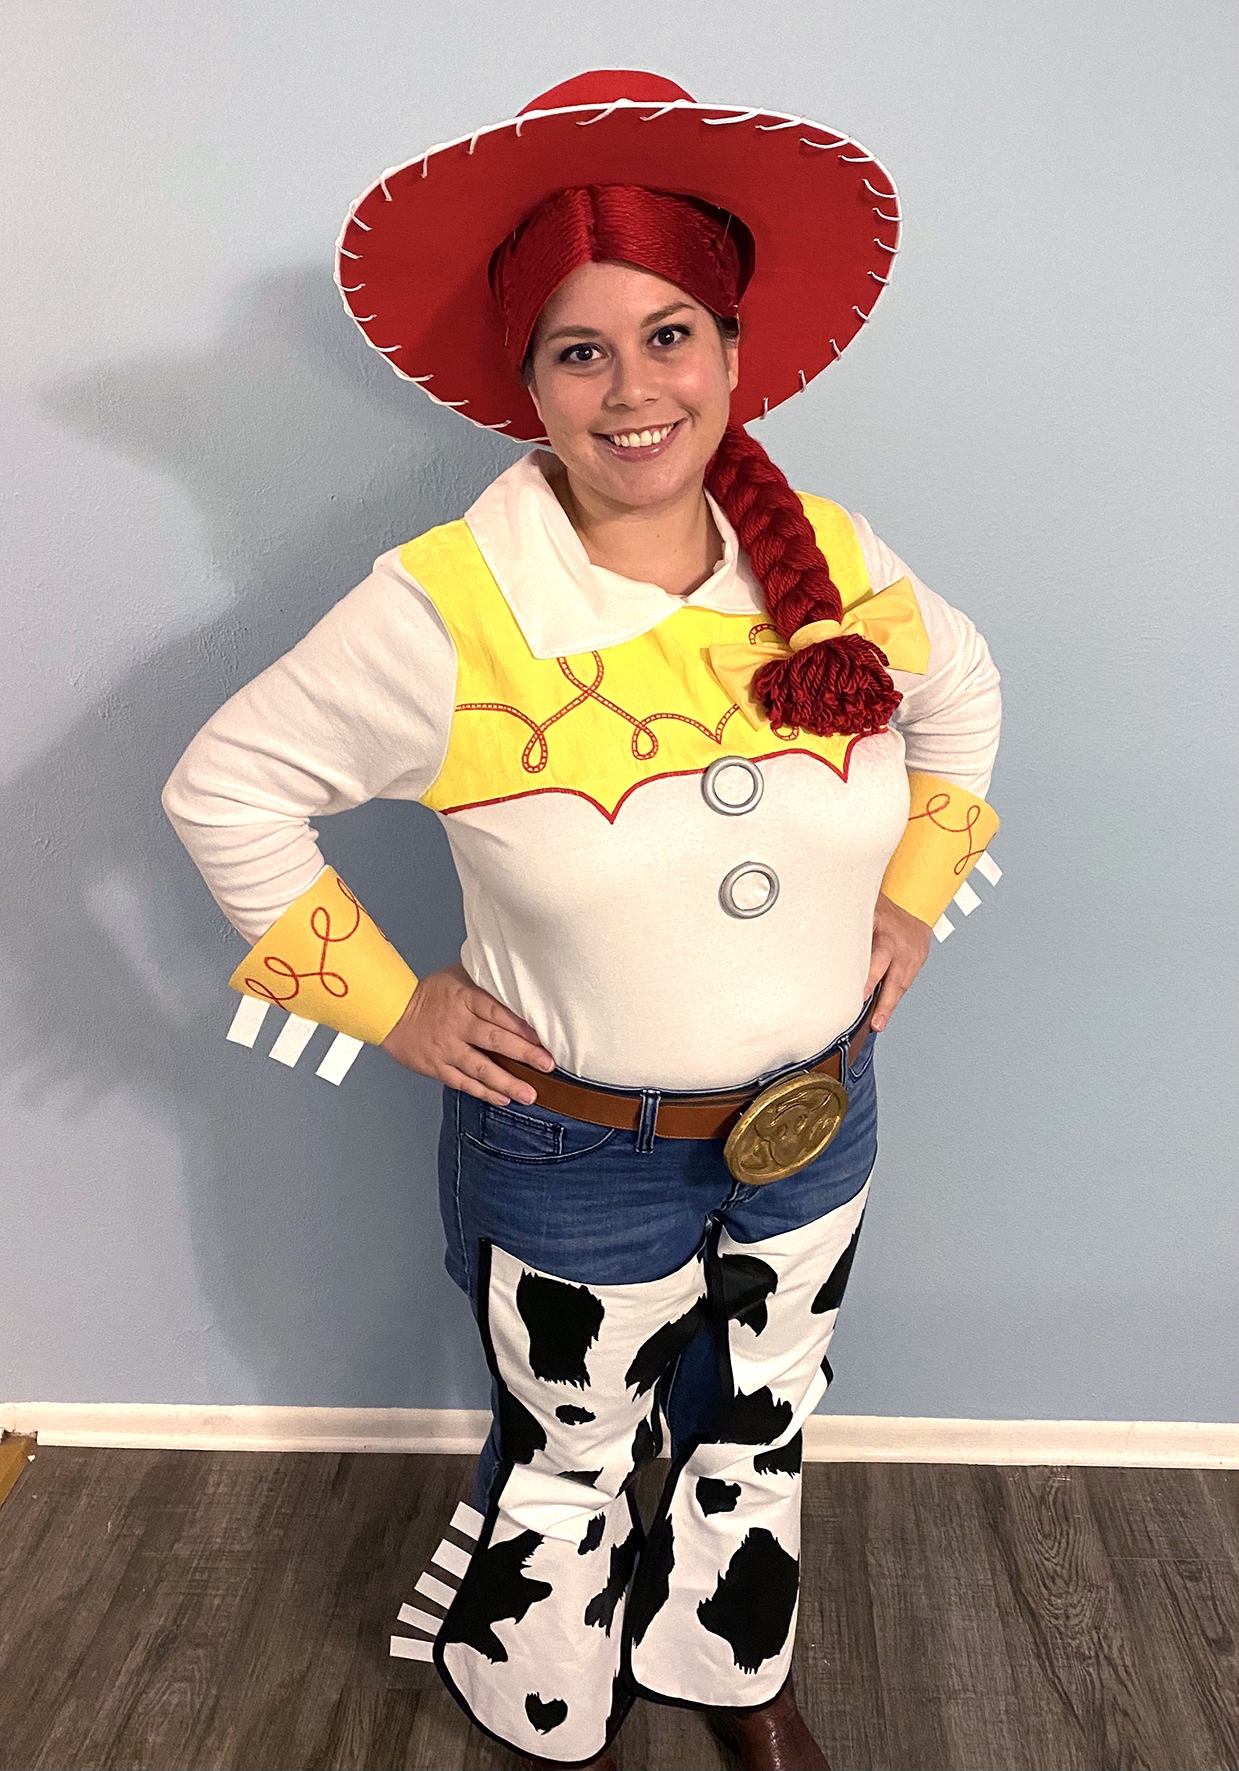 Jessie the Yodeling Cowgirl!